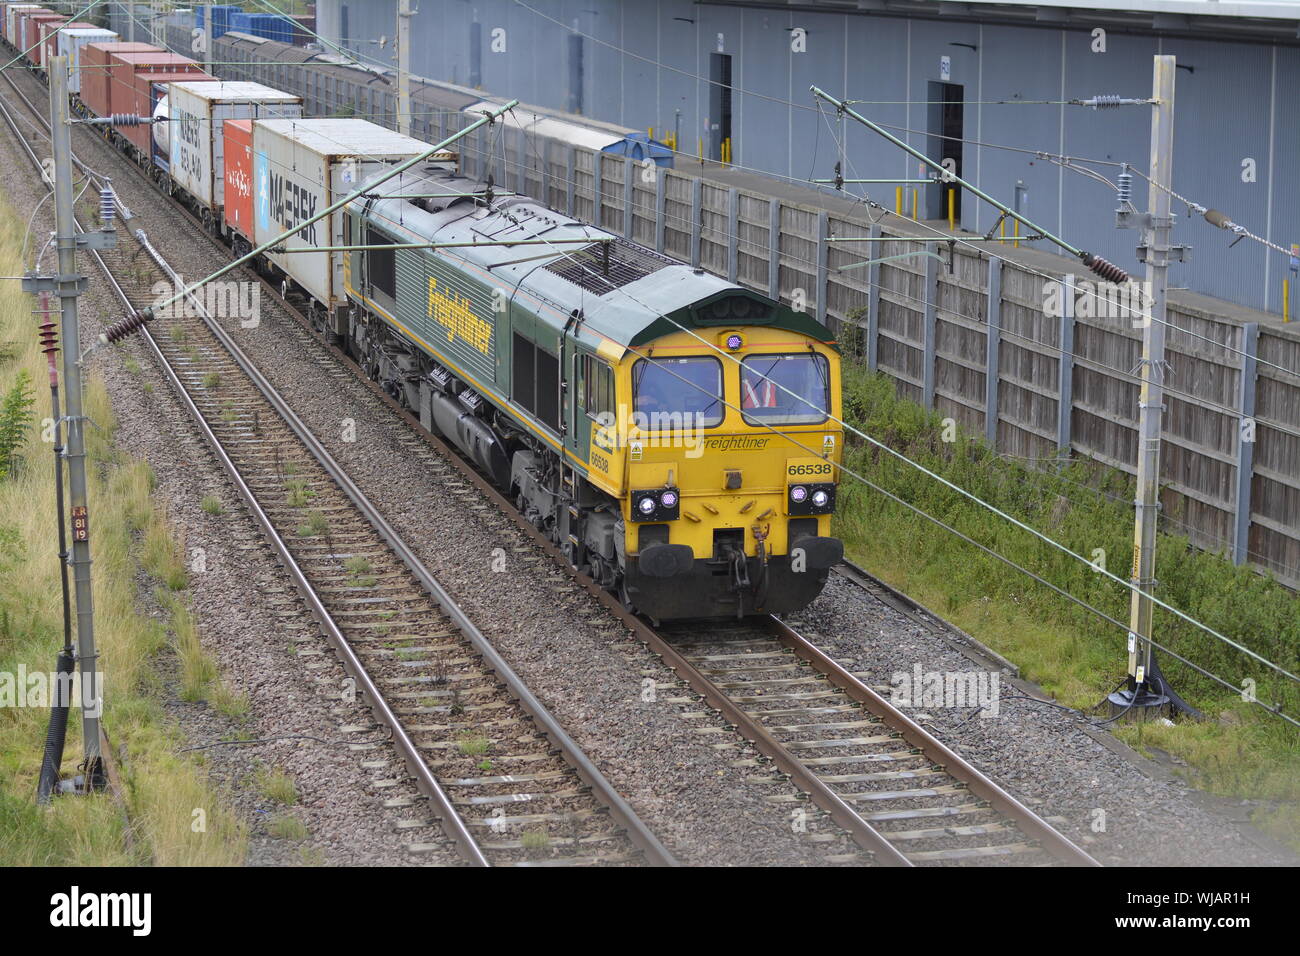 Freightliner Class 66 diesel locomotive 66538 approaches Daventry International Rail Freight Terminal with an intermodal freight train Stock Photo